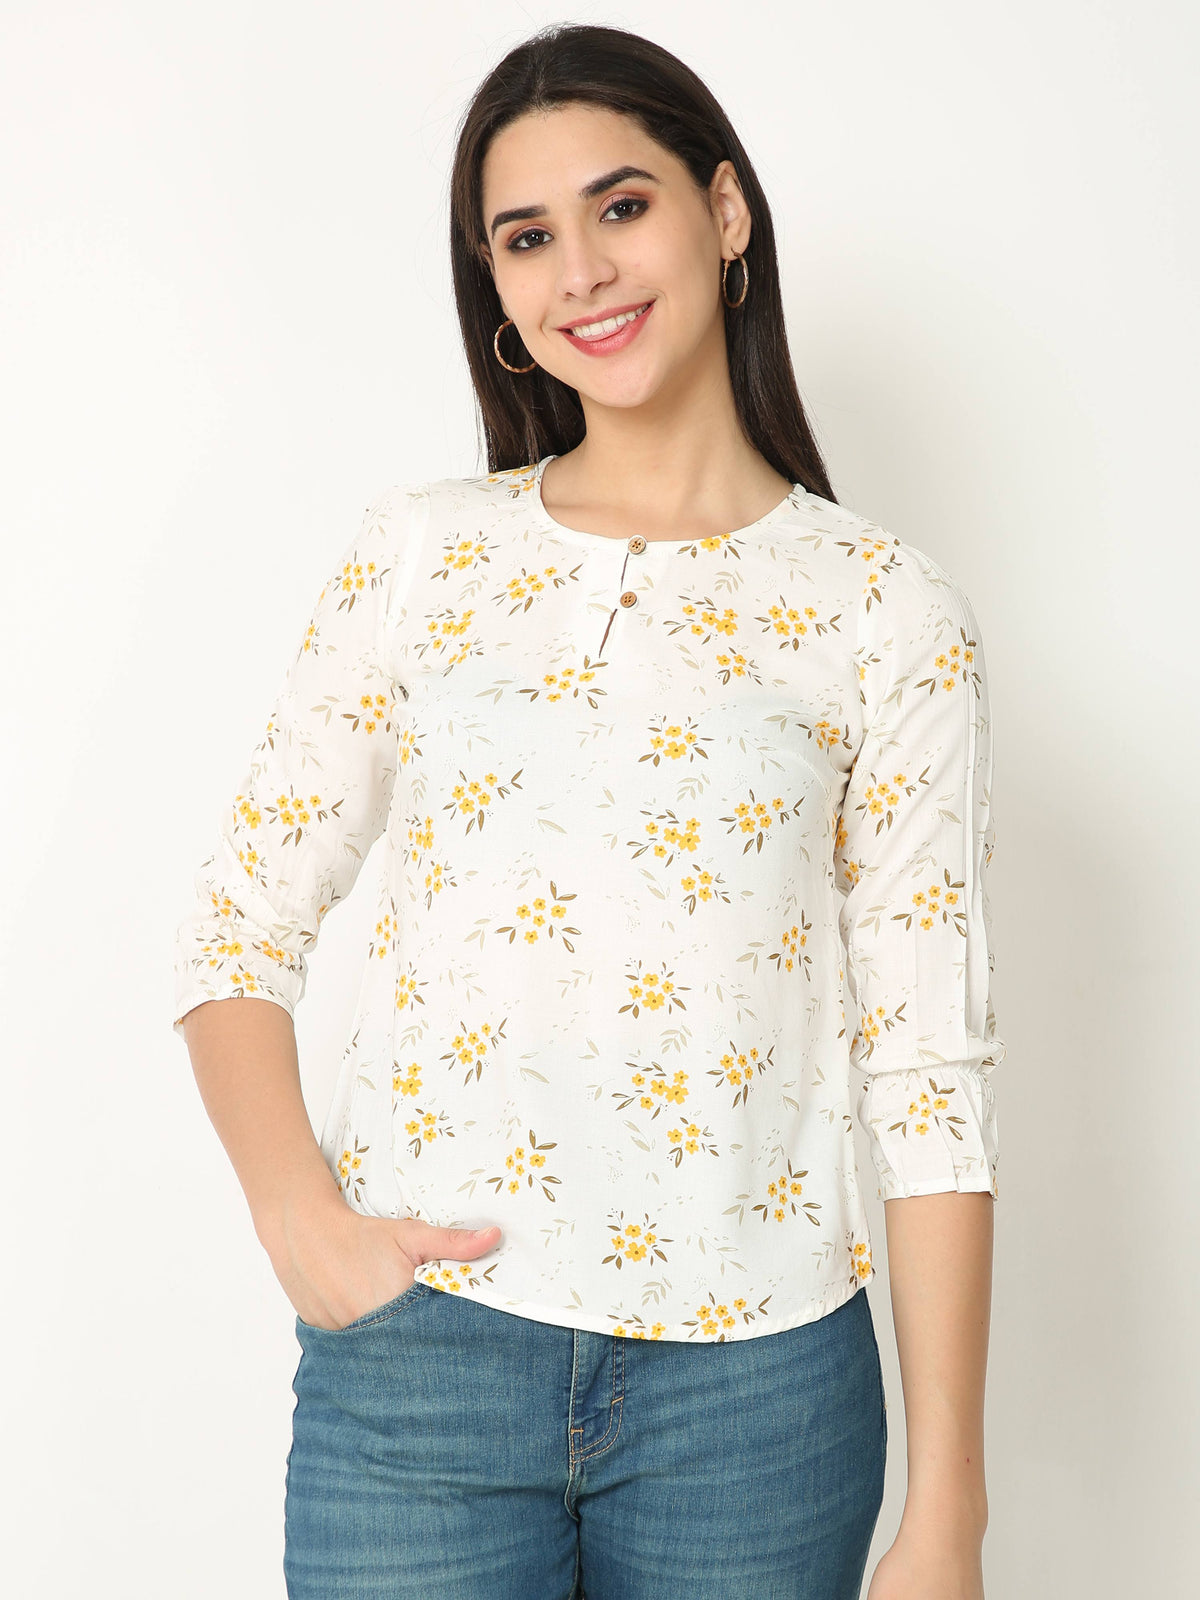 Floral Print White Casual Top